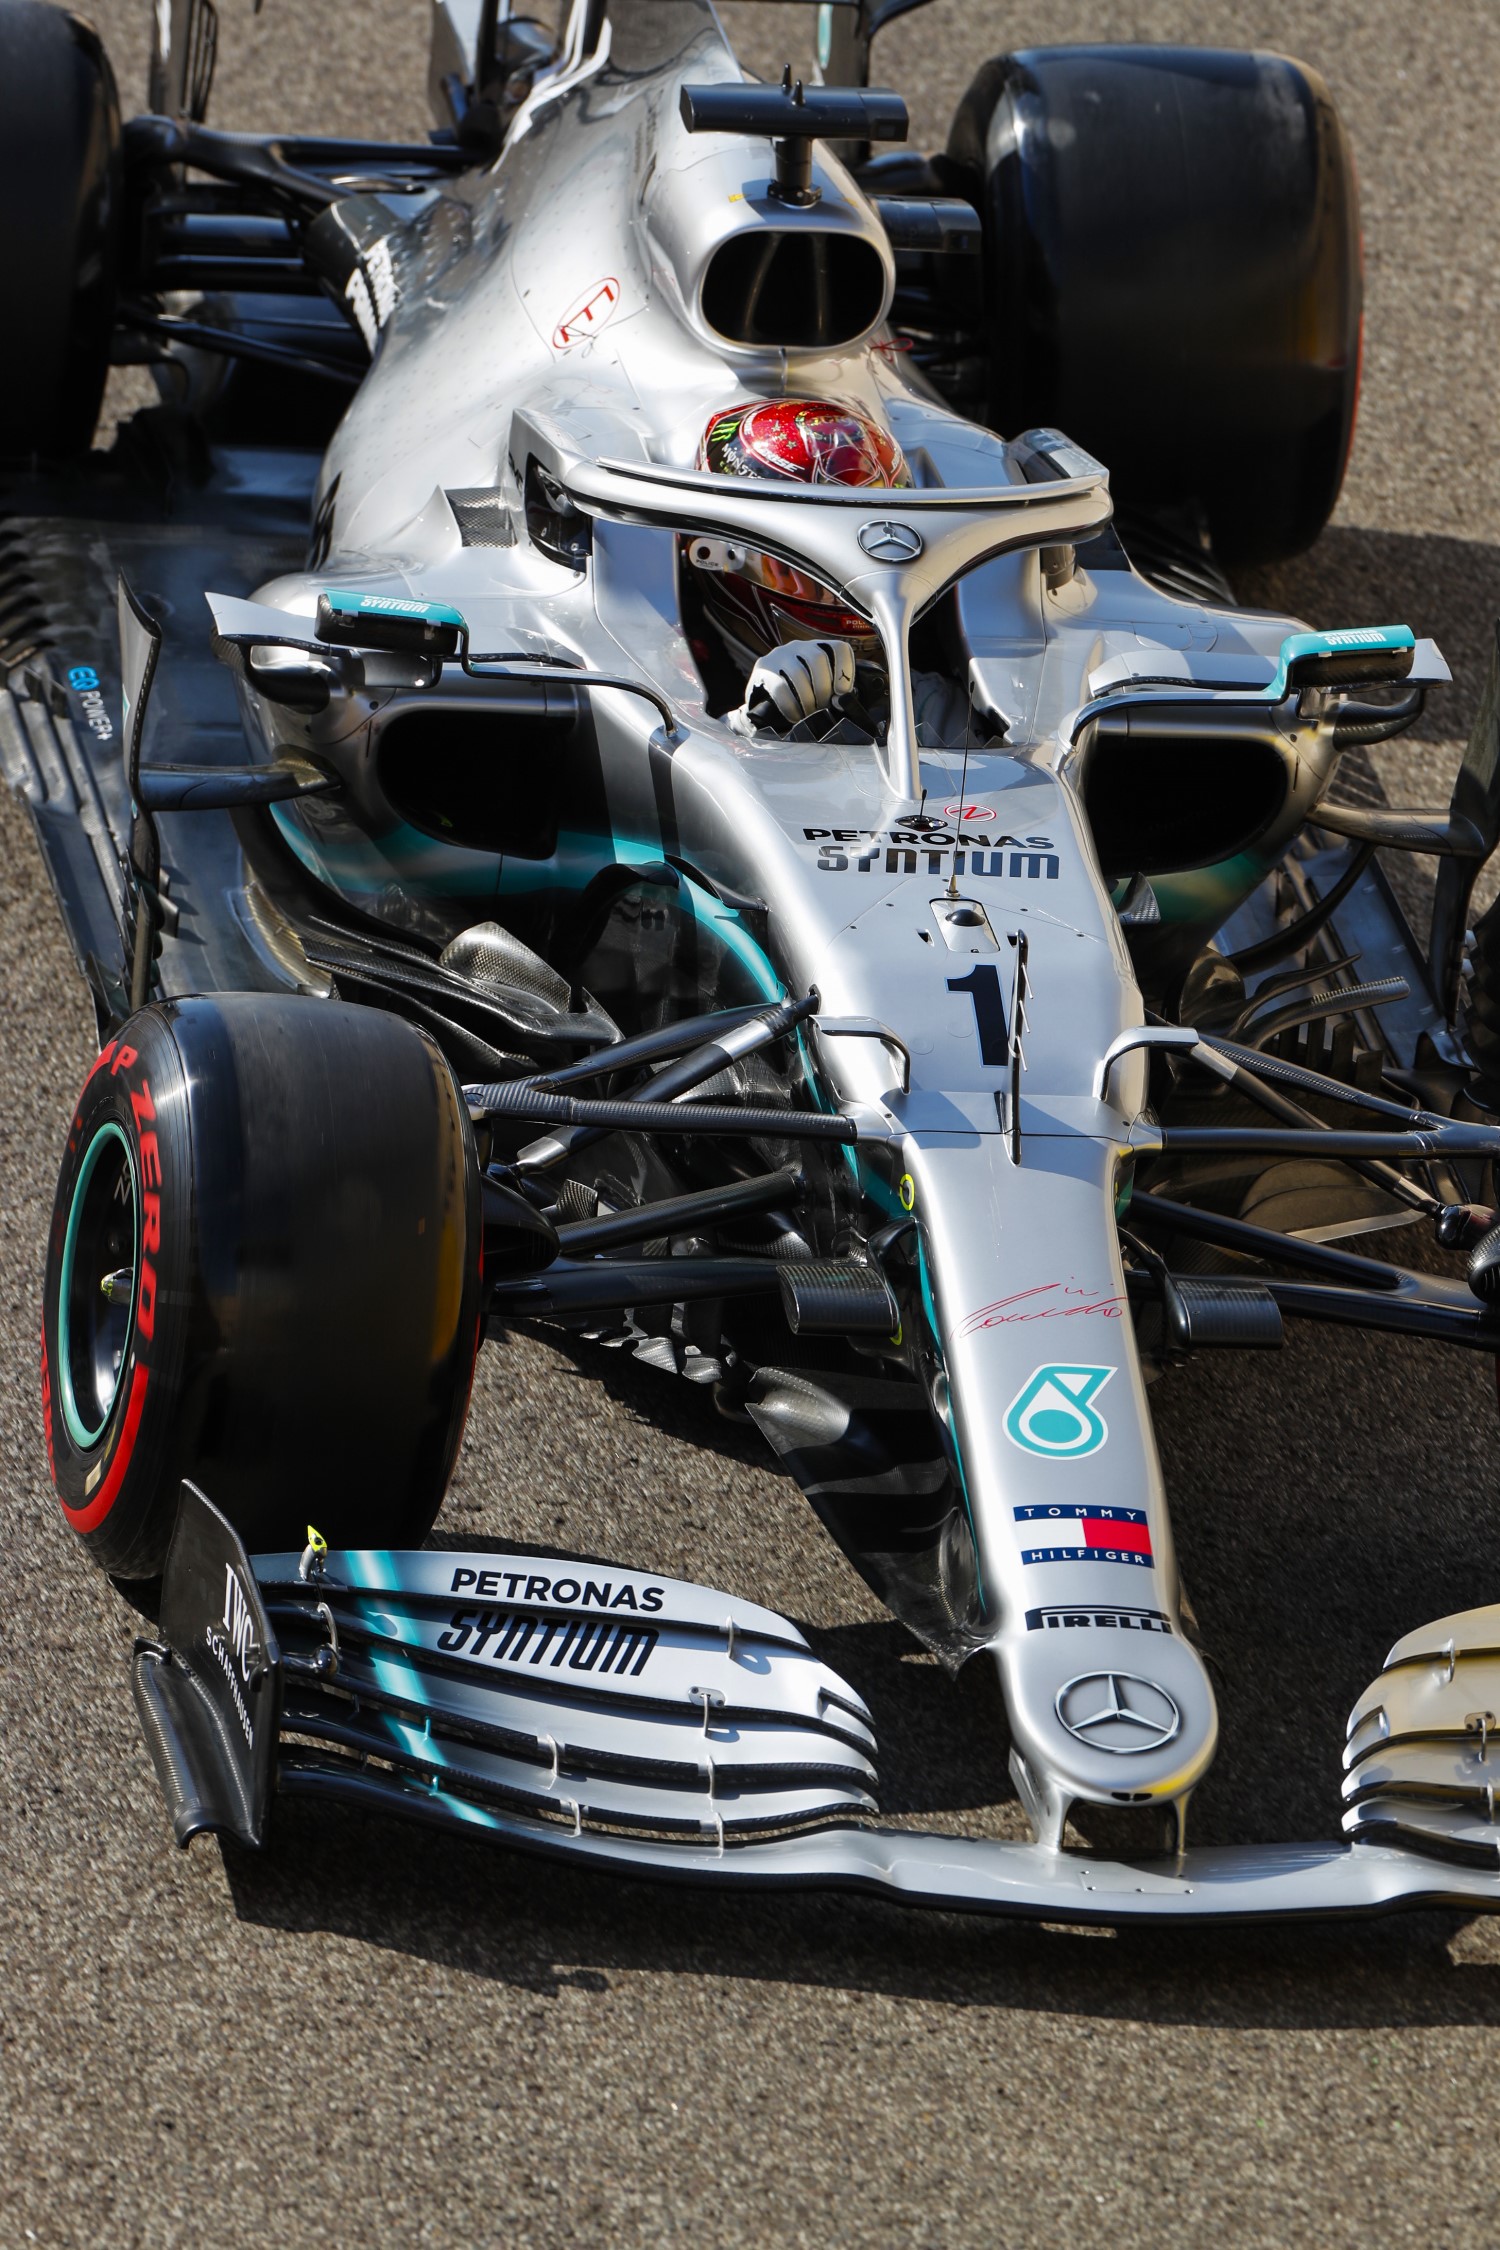 Hamilton tries out the #1 in practice Friday. He's playing Ferrari like a fiddle to extract more money from Mercedes